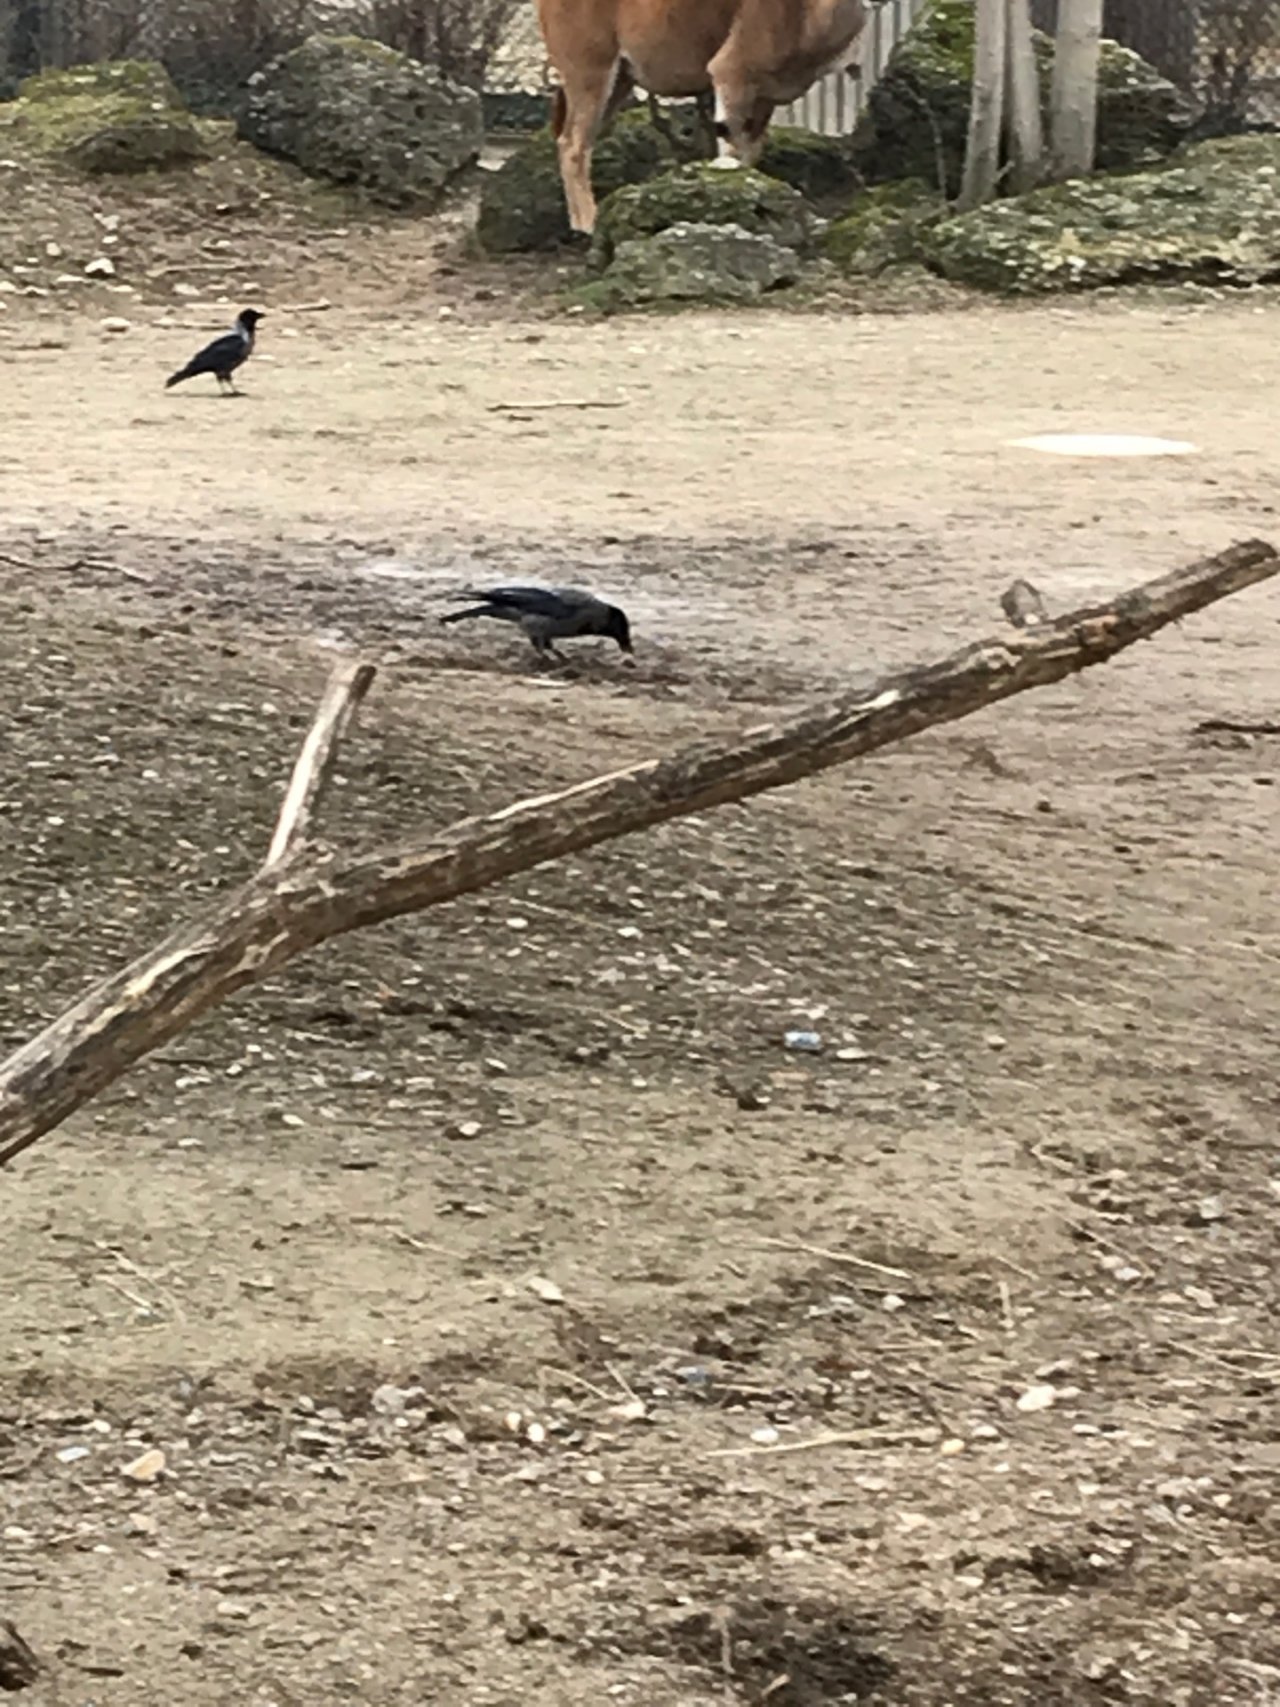 Hybrid (Carrion / Hooded) in KraMobil App spotted by TheMedicineMan on 20.02.2021